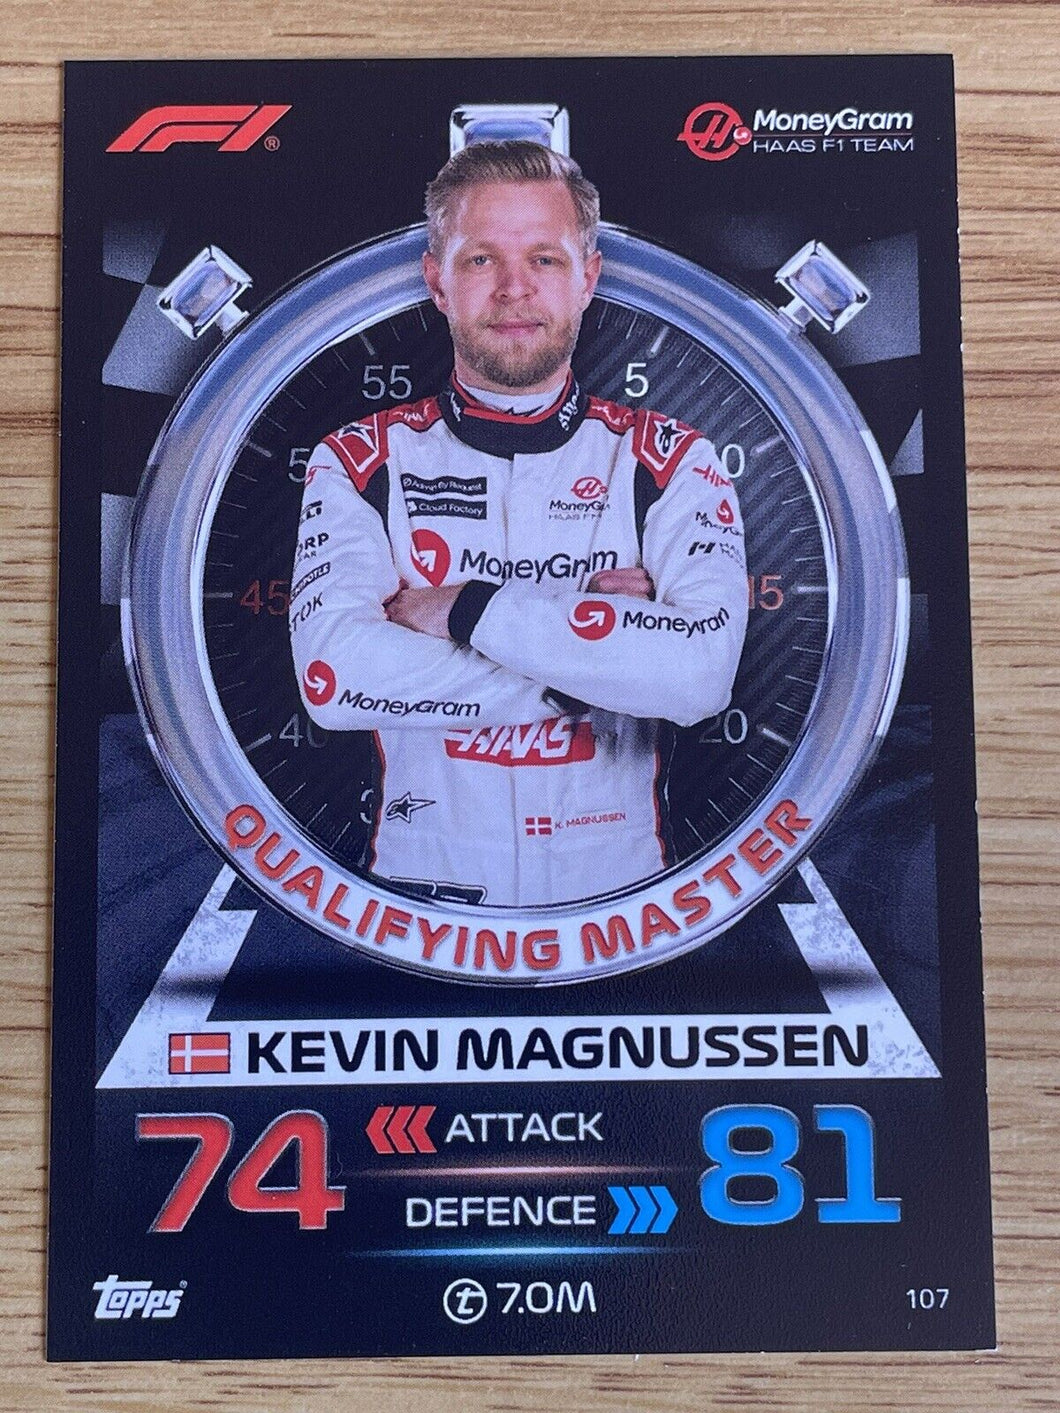 2023 - Turbo Attax - Trading Card - Kevin Magnussen - Qualifying Master - Card 107